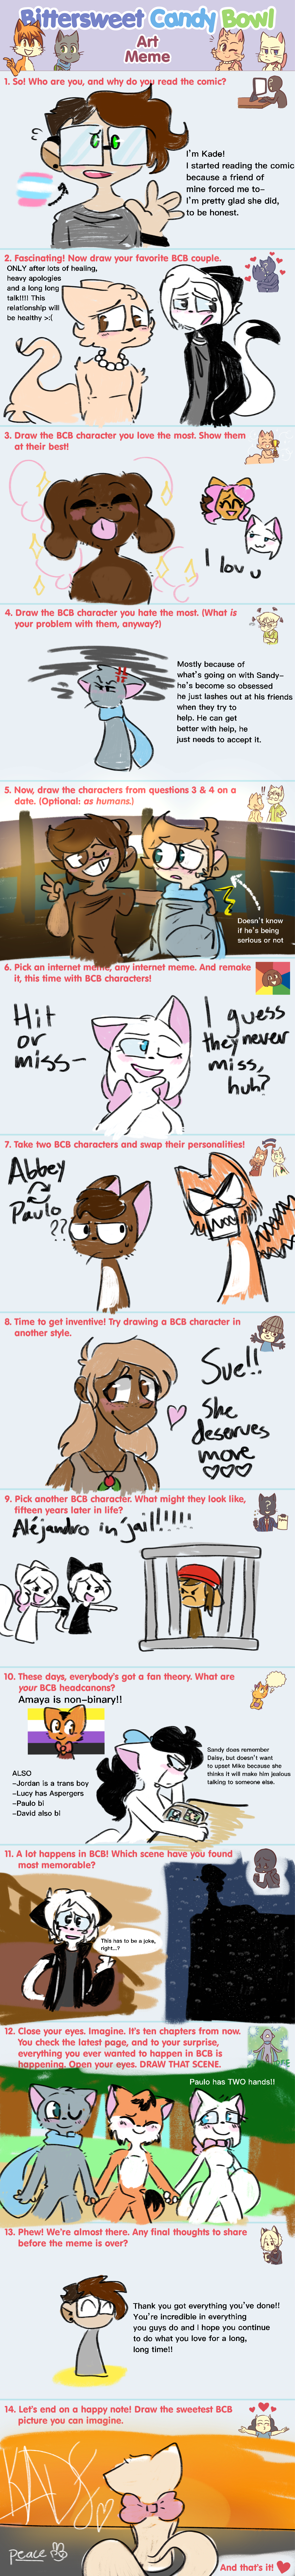 Candybooru image #14347, tagged with Abbey Agent08_(Artist) Alejandro Amaya Augustus AugustusxDaisy BCB_Art_Meme Daisy Lucy Mike MikexDavid MikexPauloxLucy Paulo Sandy Sue polyamory